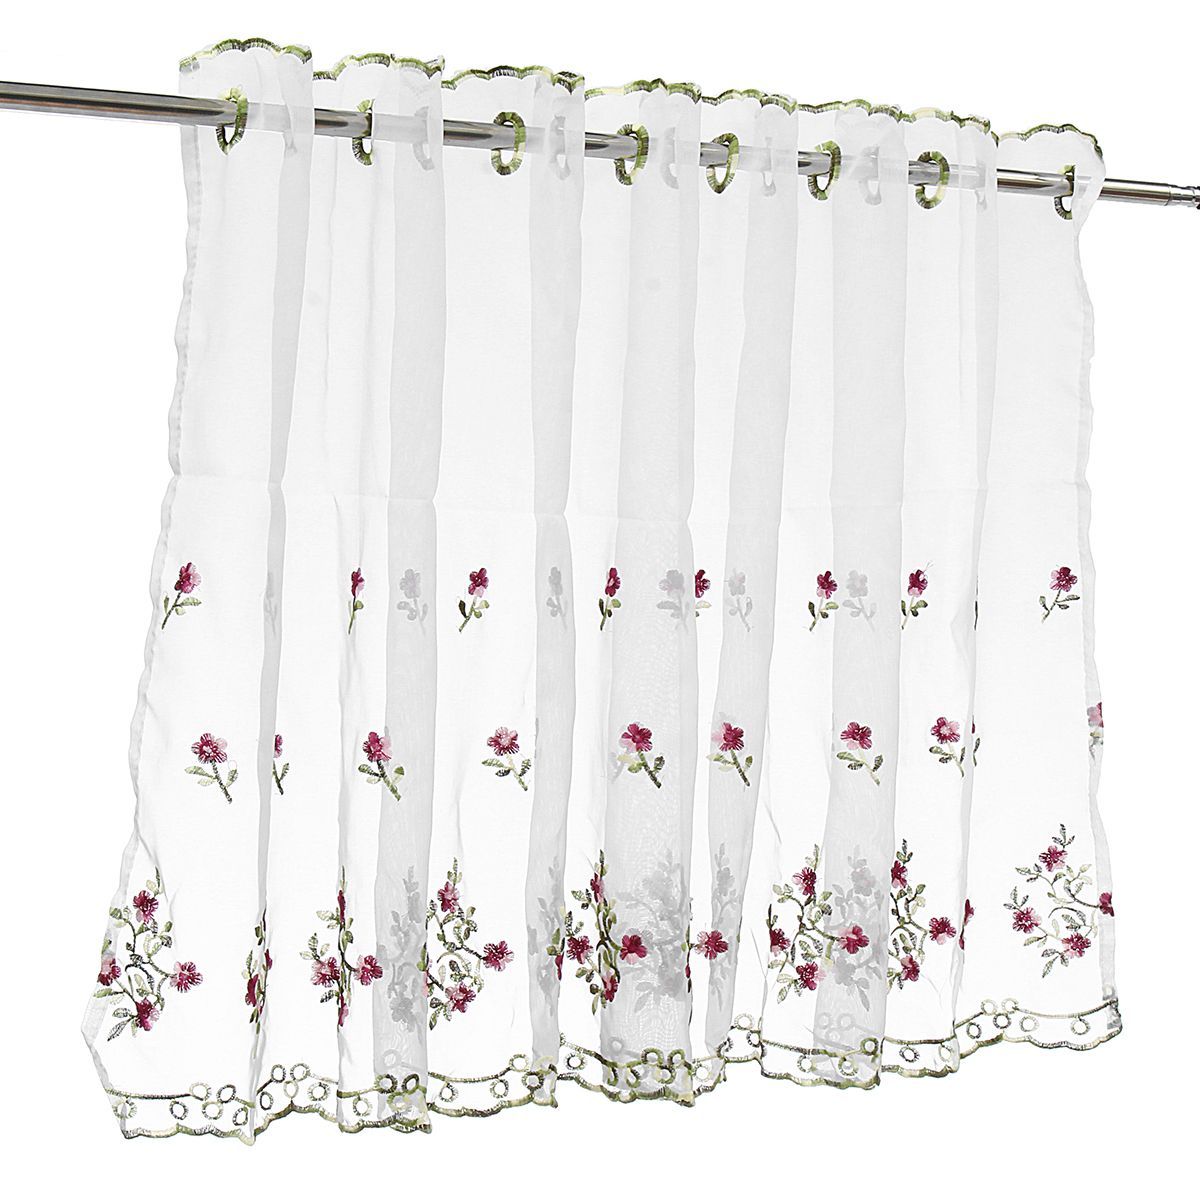 Kitchen-Cafe-Curtains-Country-Embroidery-Window-Sheer-Voile-Short-Panel-Valance-1528711